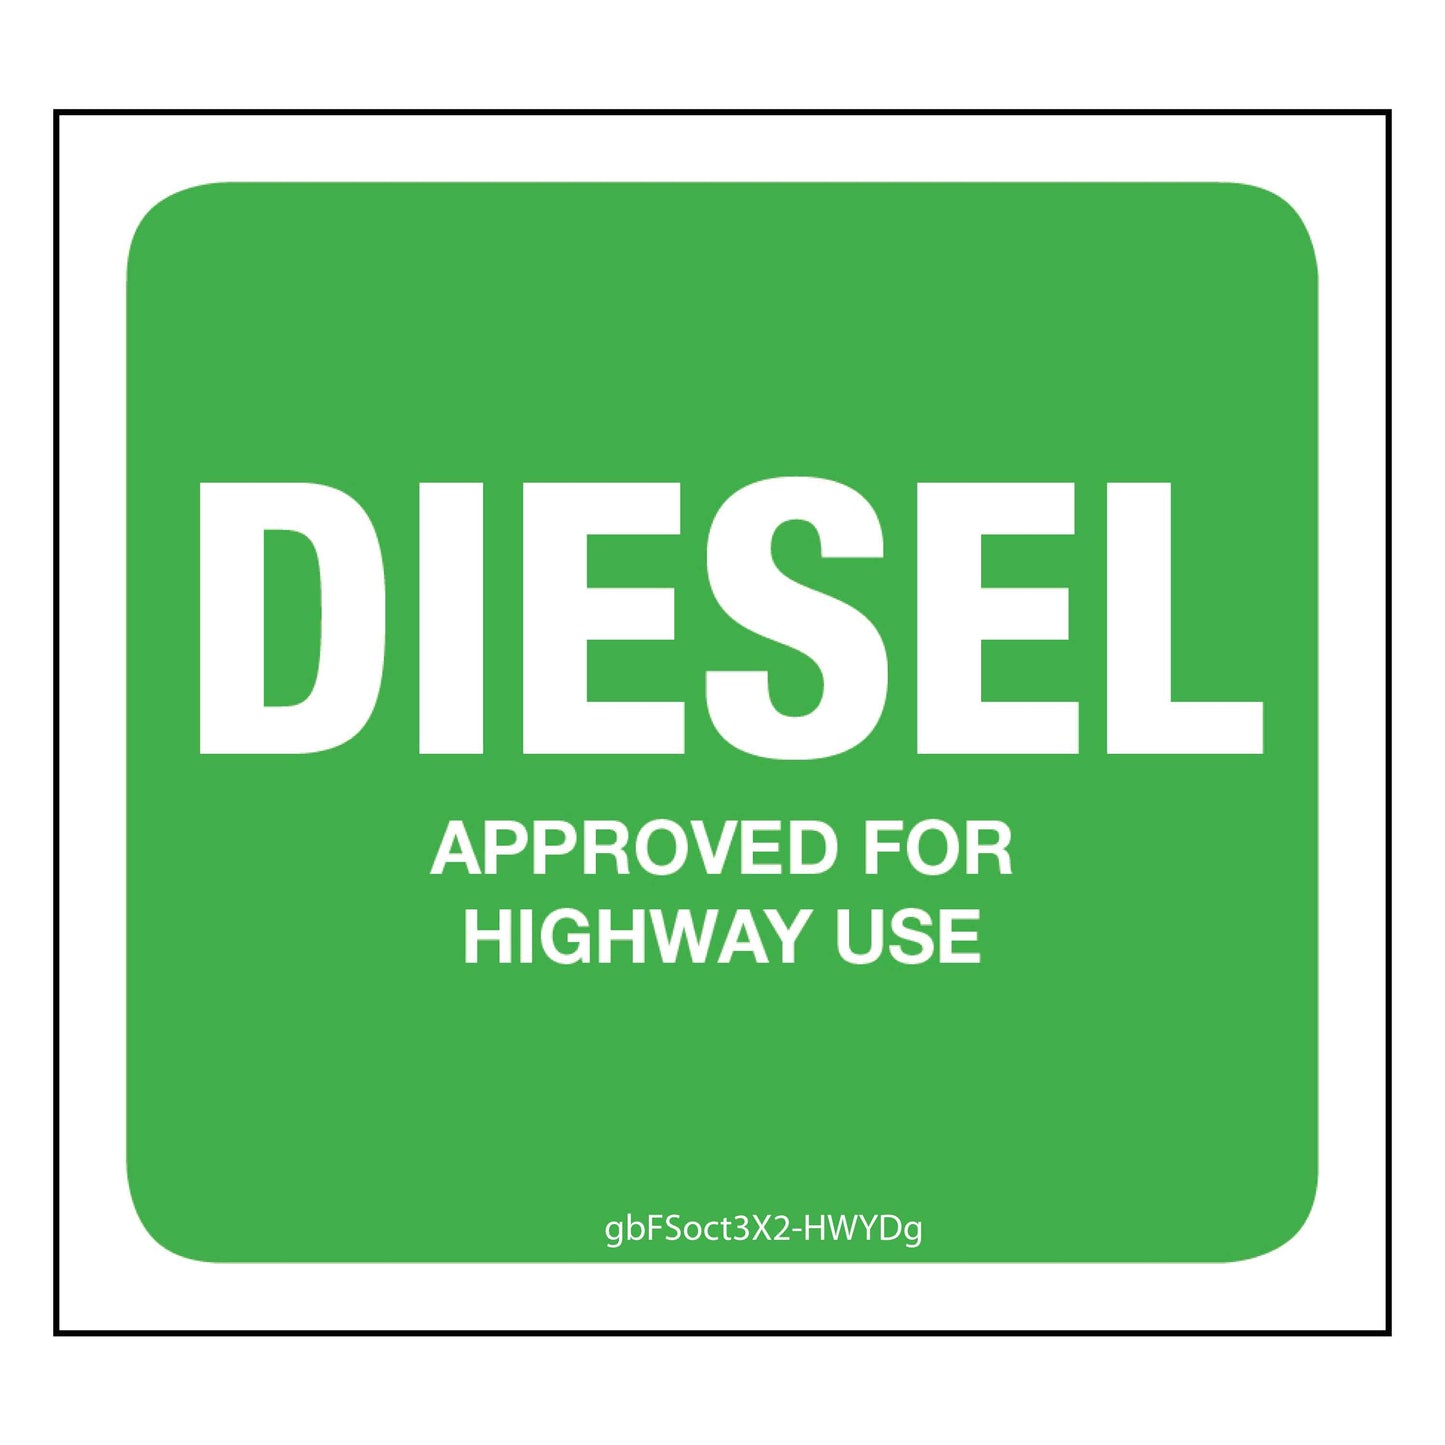 Diesel (On Road) Pump Decal, Green. 3 inches by 2.75 inches in size. 